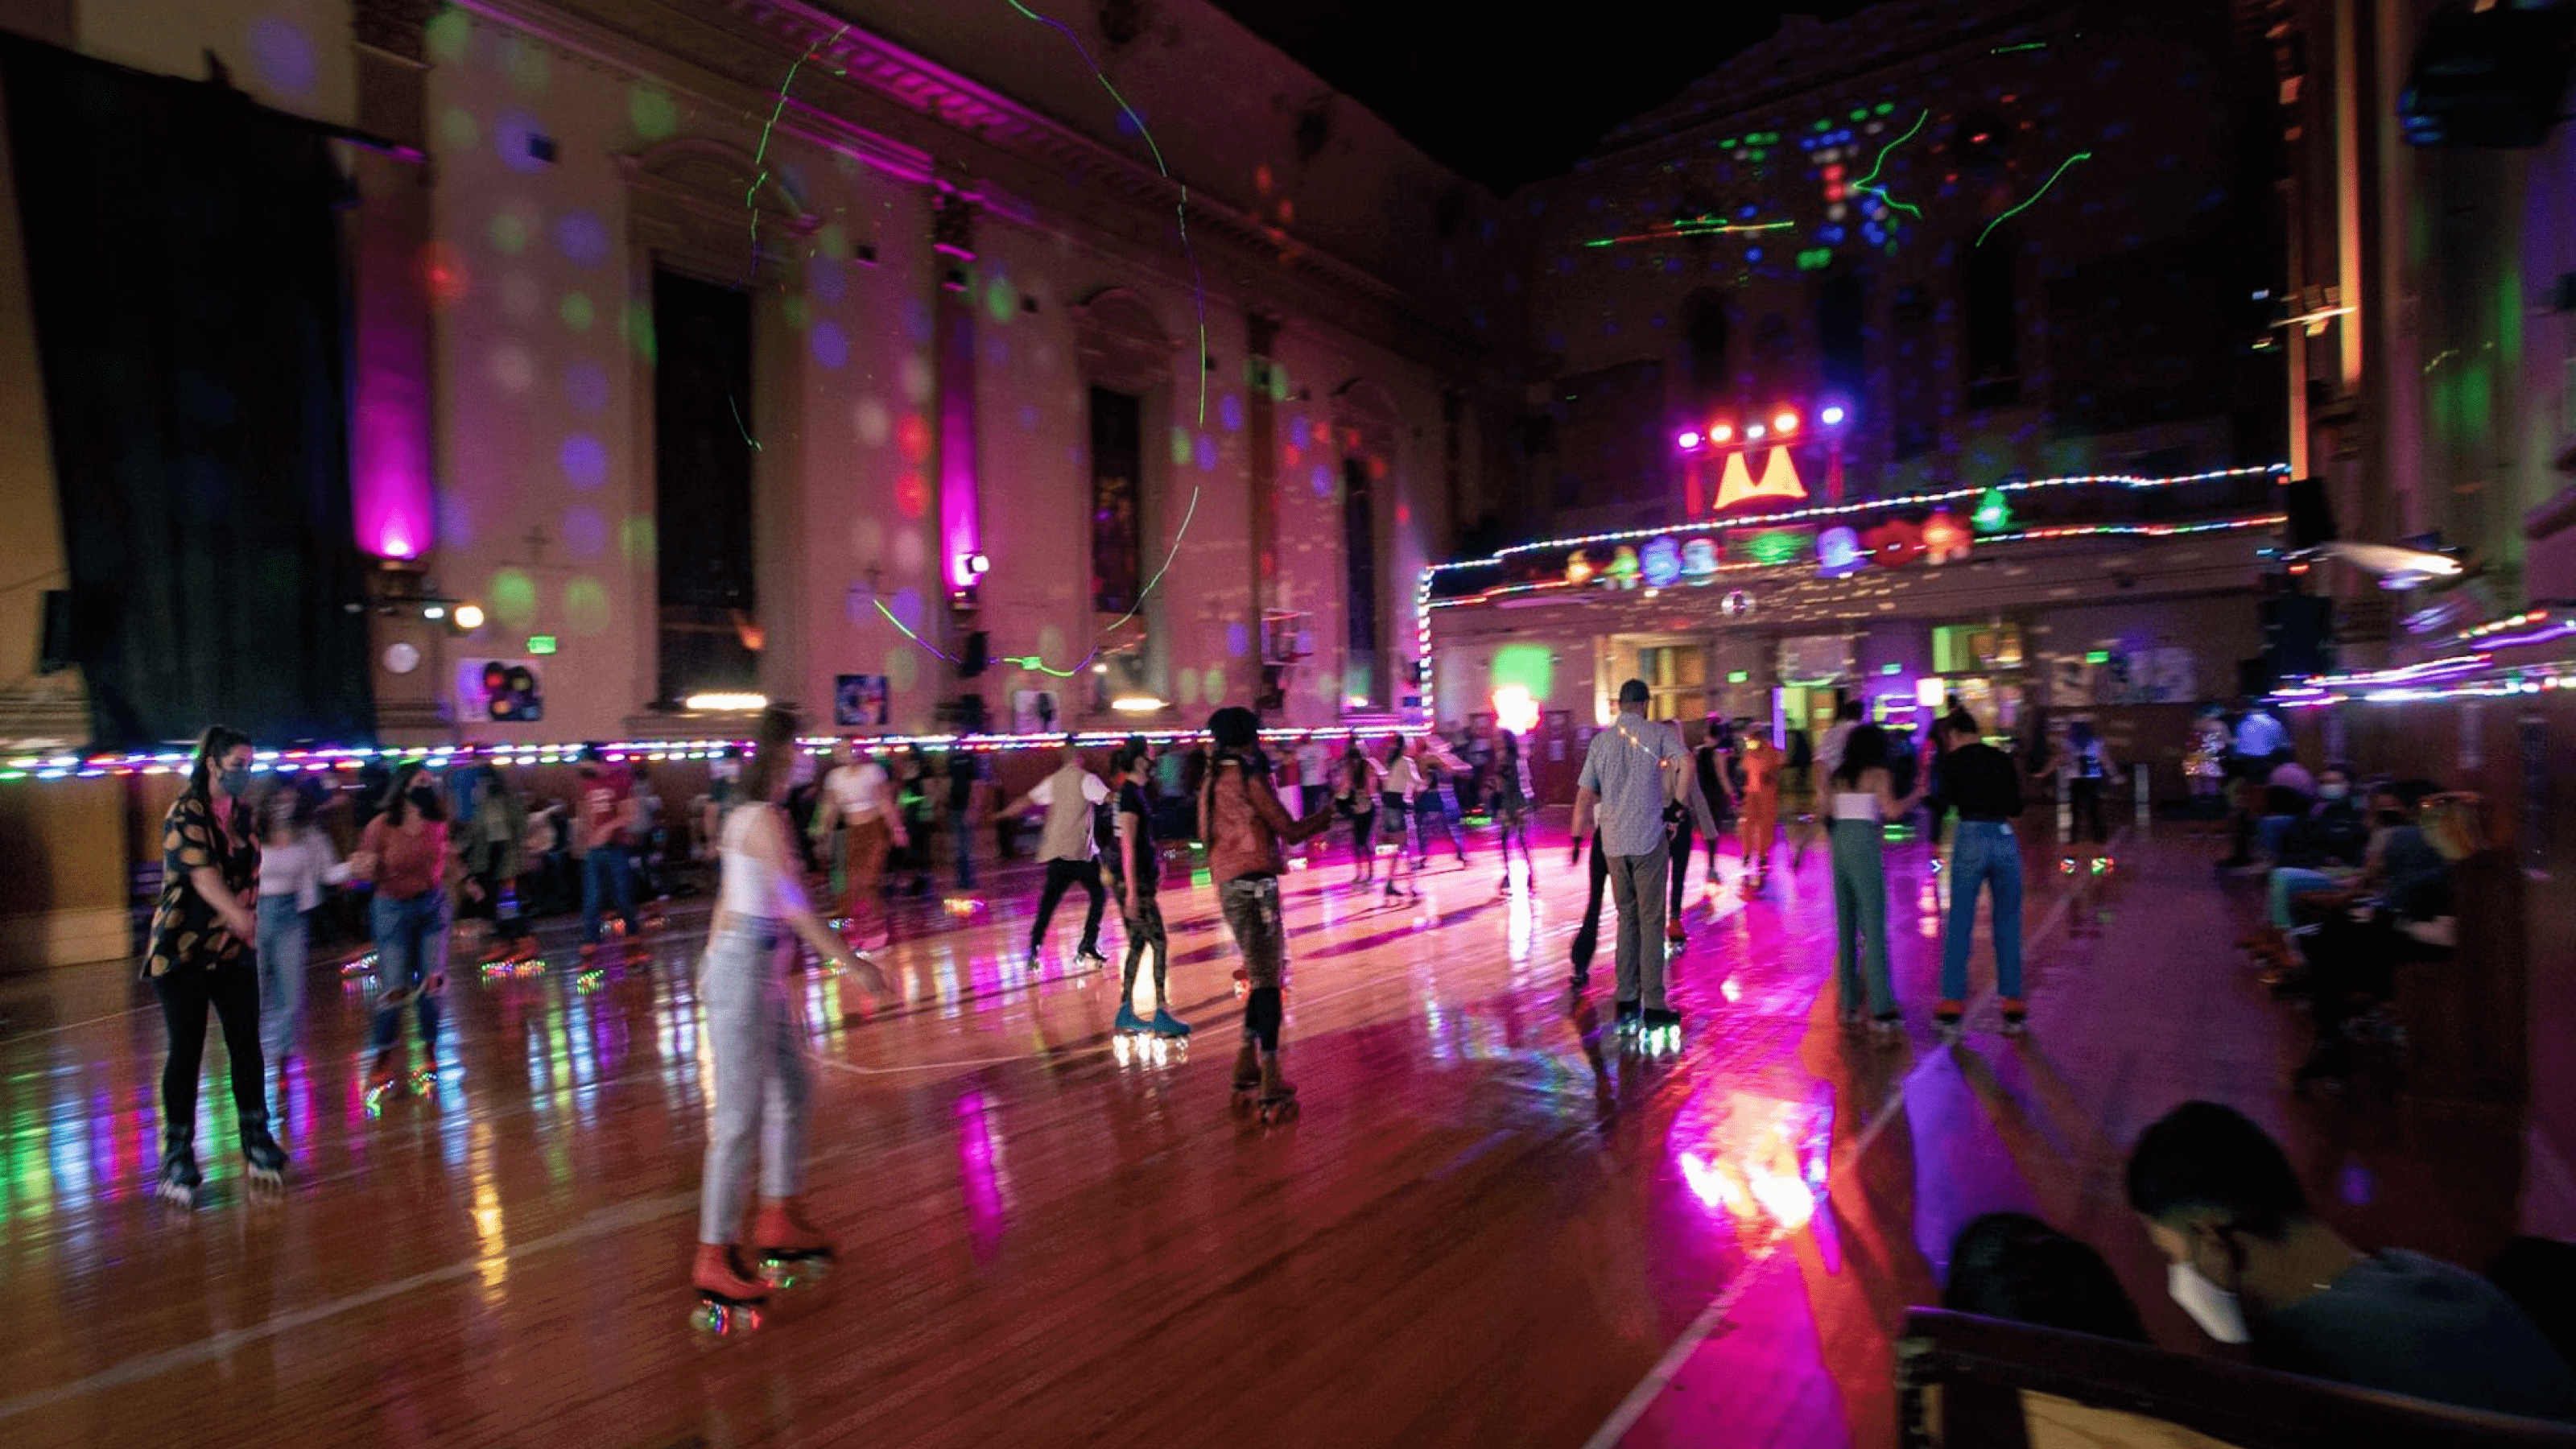 A group of people skating at a roller rink